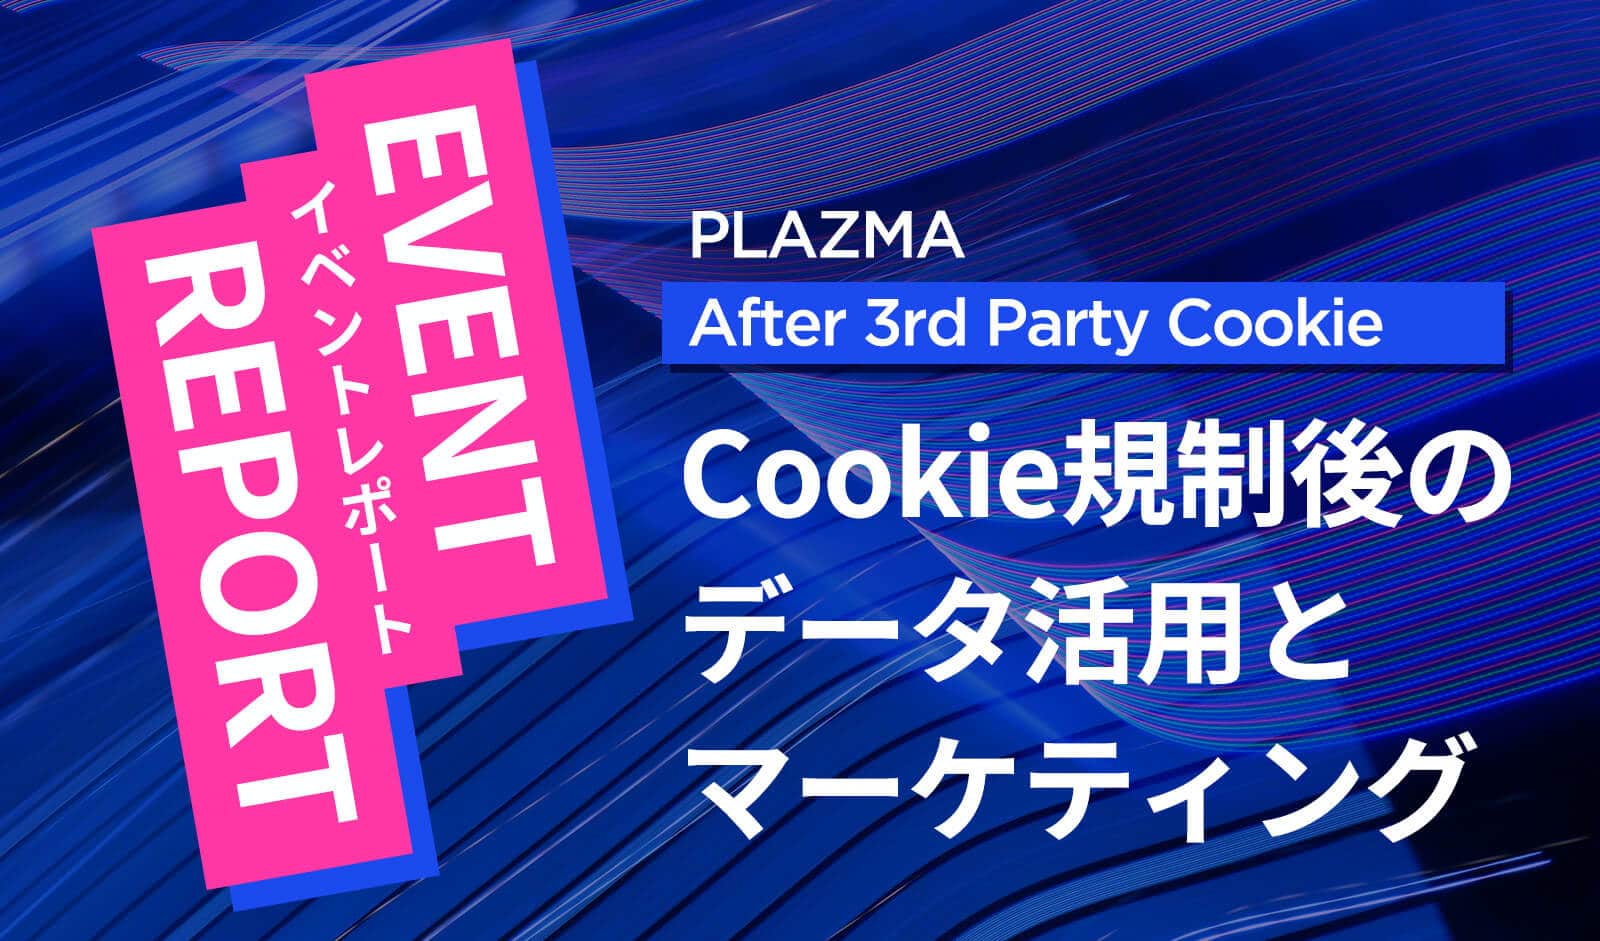 Cookie規制後のデータ活用とマーケティング | PLAZMA  After 3rd Party Cookie イベントレポート